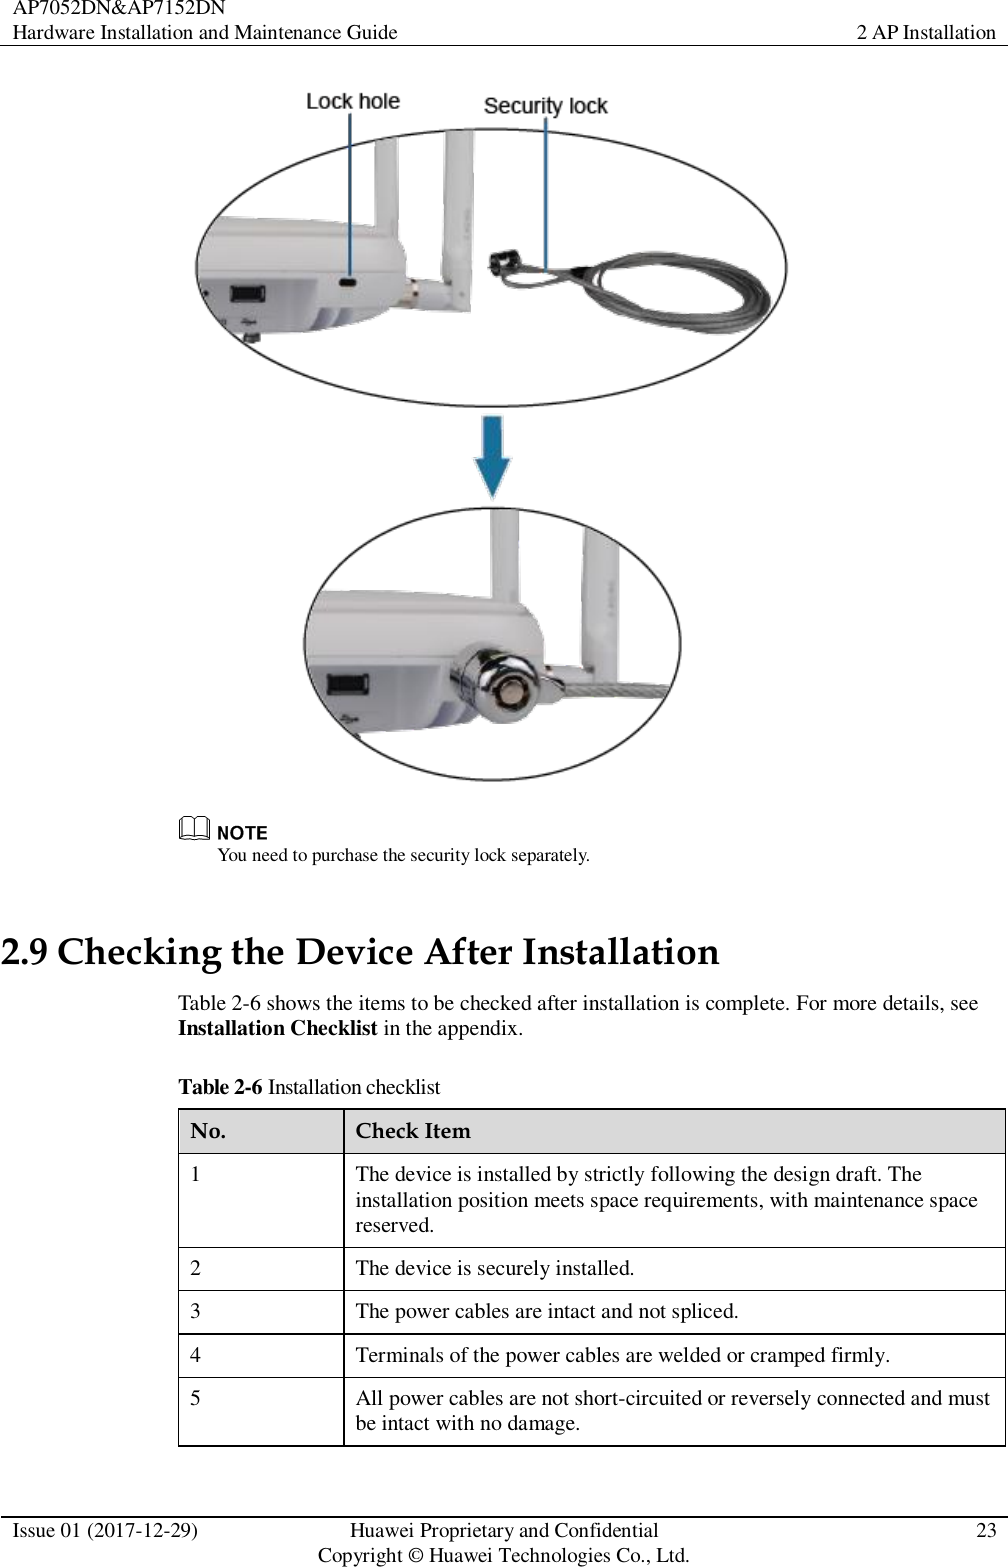 AP7052DN&amp;AP7152DN Hardware Installation and Maintenance Guide 2 AP Installation  Issue 01 (2017-12-29) Huawei Proprietary and Confidential                                     Copyright © Huawei Technologies Co., Ltd. 23    You need to purchase the security lock separately. 2.9 Checking the Device After Installation Table 2-6 shows the items to be checked after installation is complete. For more details, see Installation Checklist in the appendix. Table 2-6 Installation checklist No. Check Item 1 The device is installed by strictly following the design draft. The installation position meets space requirements, with maintenance space reserved. 2 The device is securely installed. 3 The power cables are intact and not spliced. 4 Terminals of the power cables are welded or cramped firmly. 5 All power cables are not short-circuited or reversely connected and must be intact with no damage. 